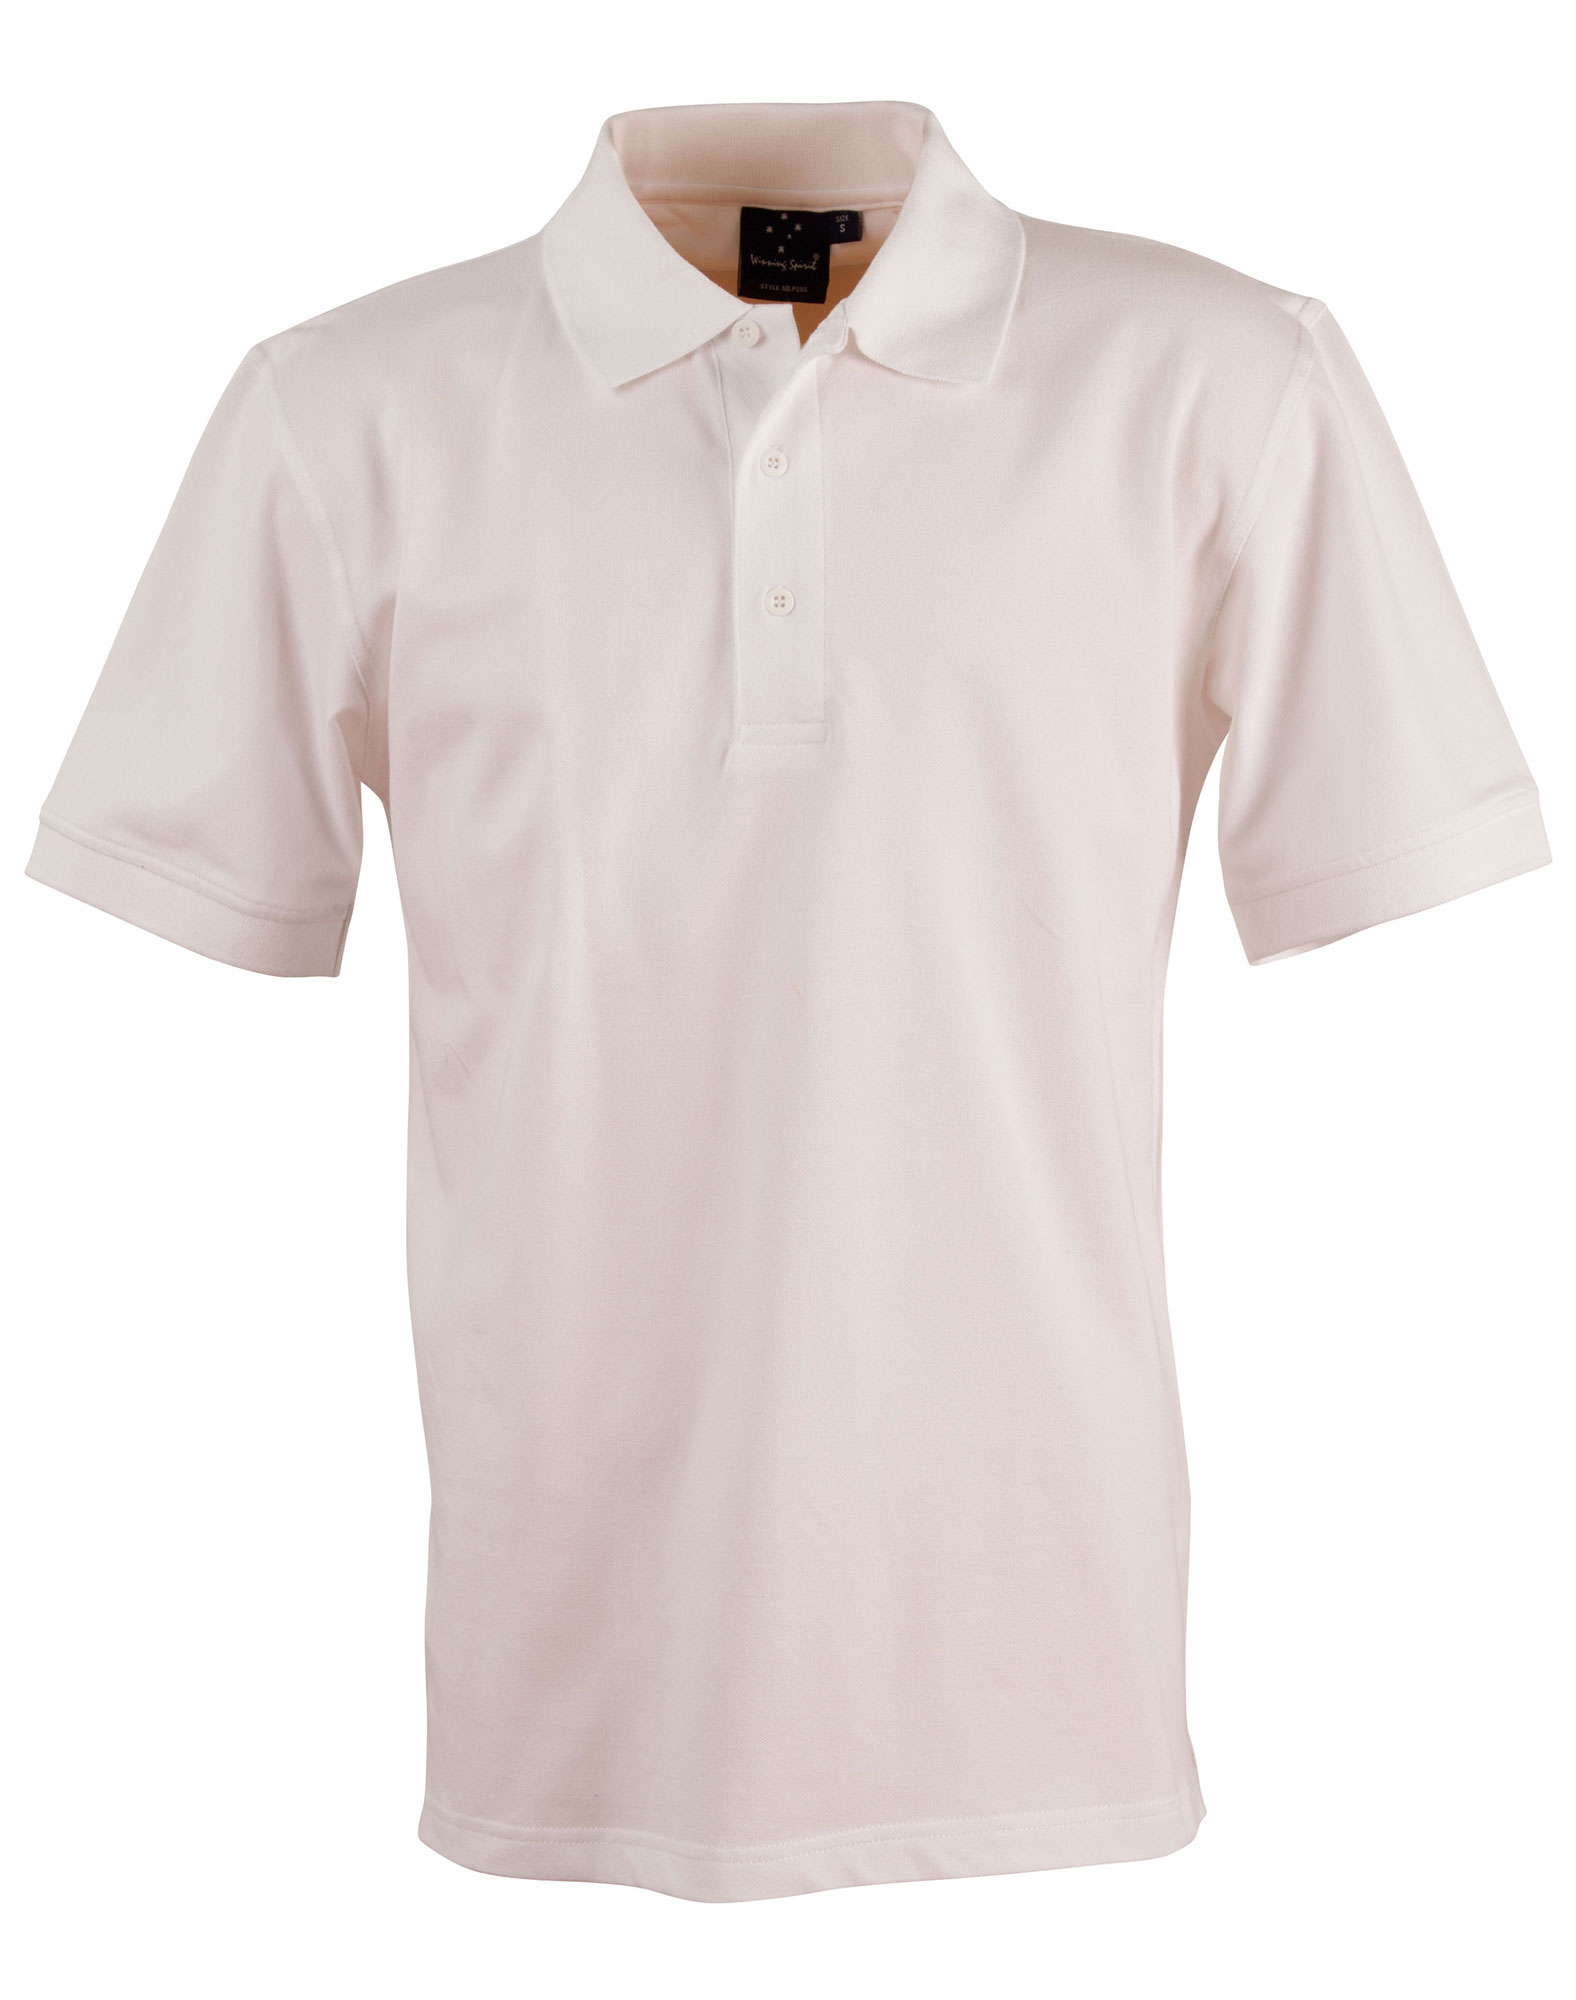 PS55/PS56 DARLING HARBOUR POLO Men’s